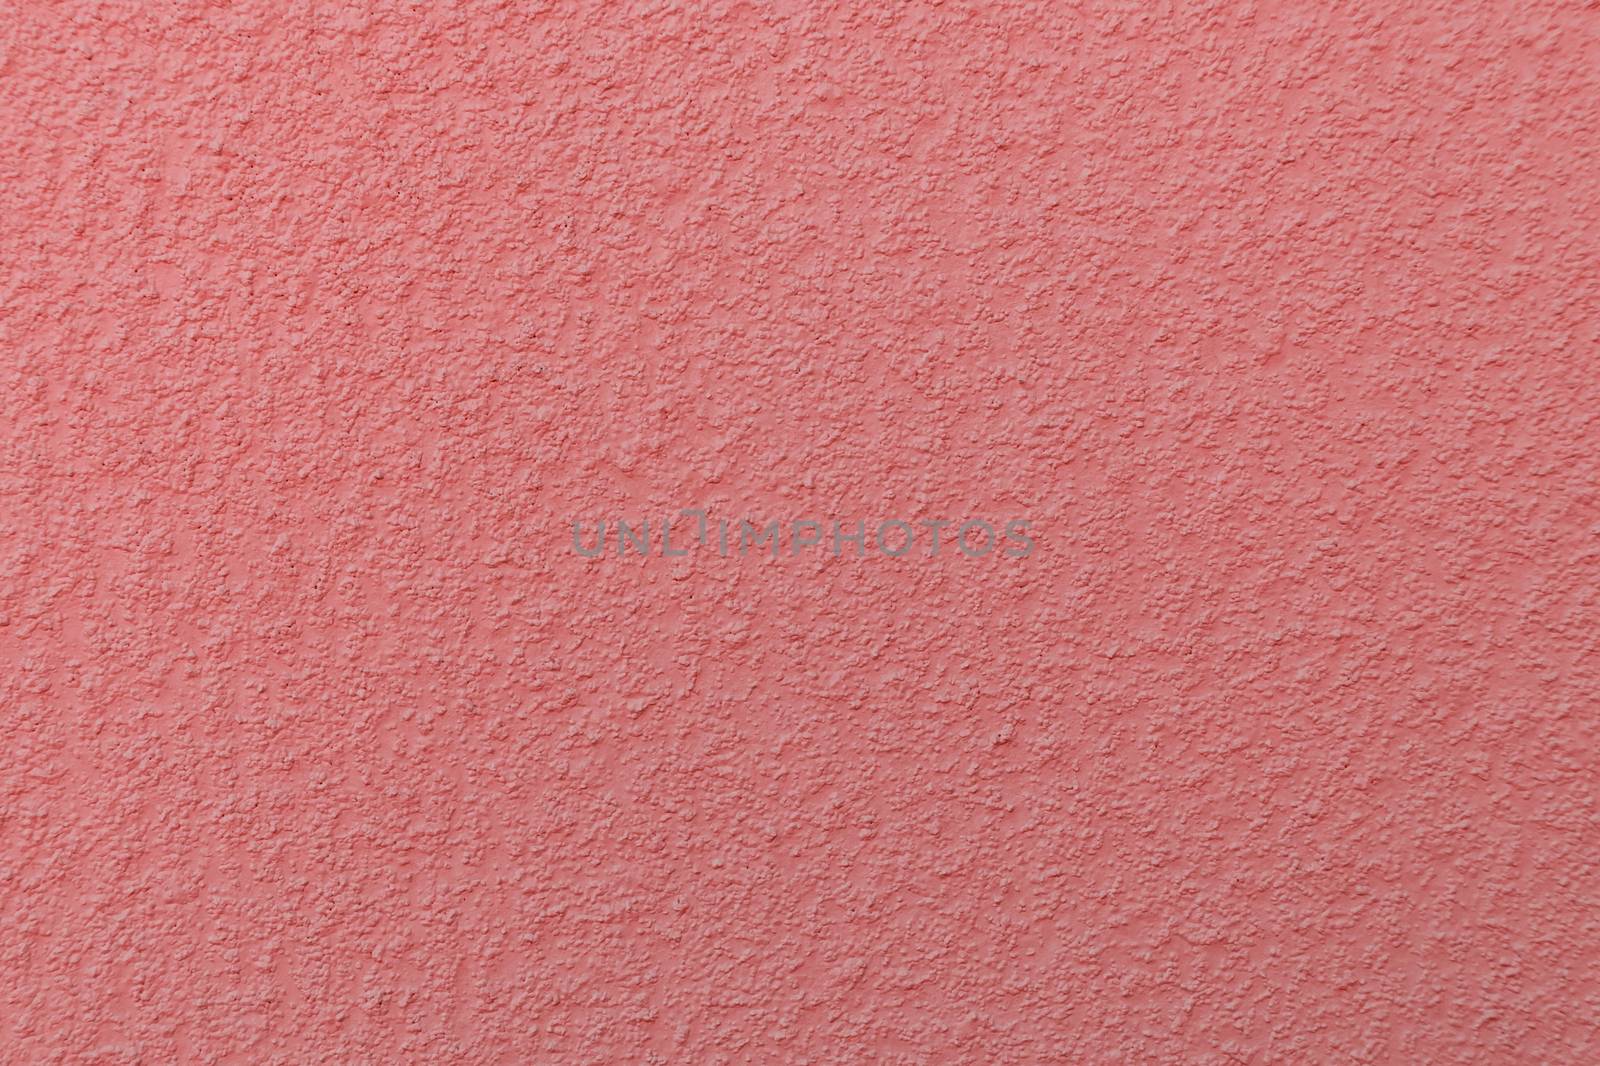 surface of the plastered wall painted in coral color-trendy color of 2019 year by galsand